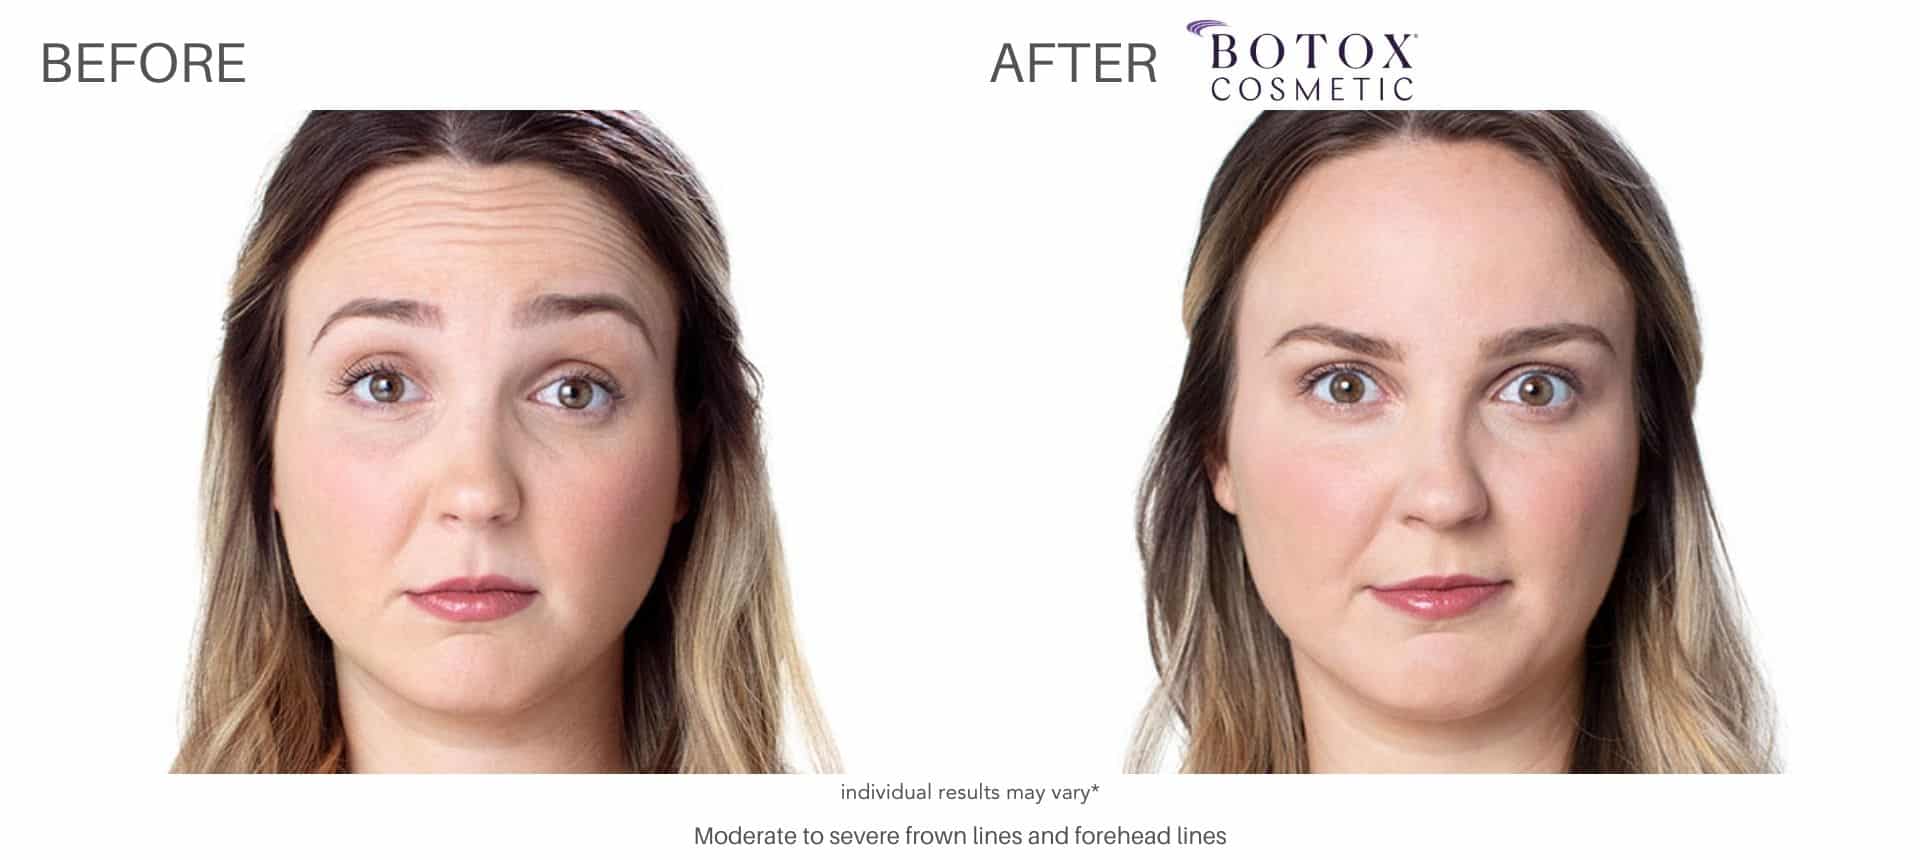 Woman's before and after picture from Botox